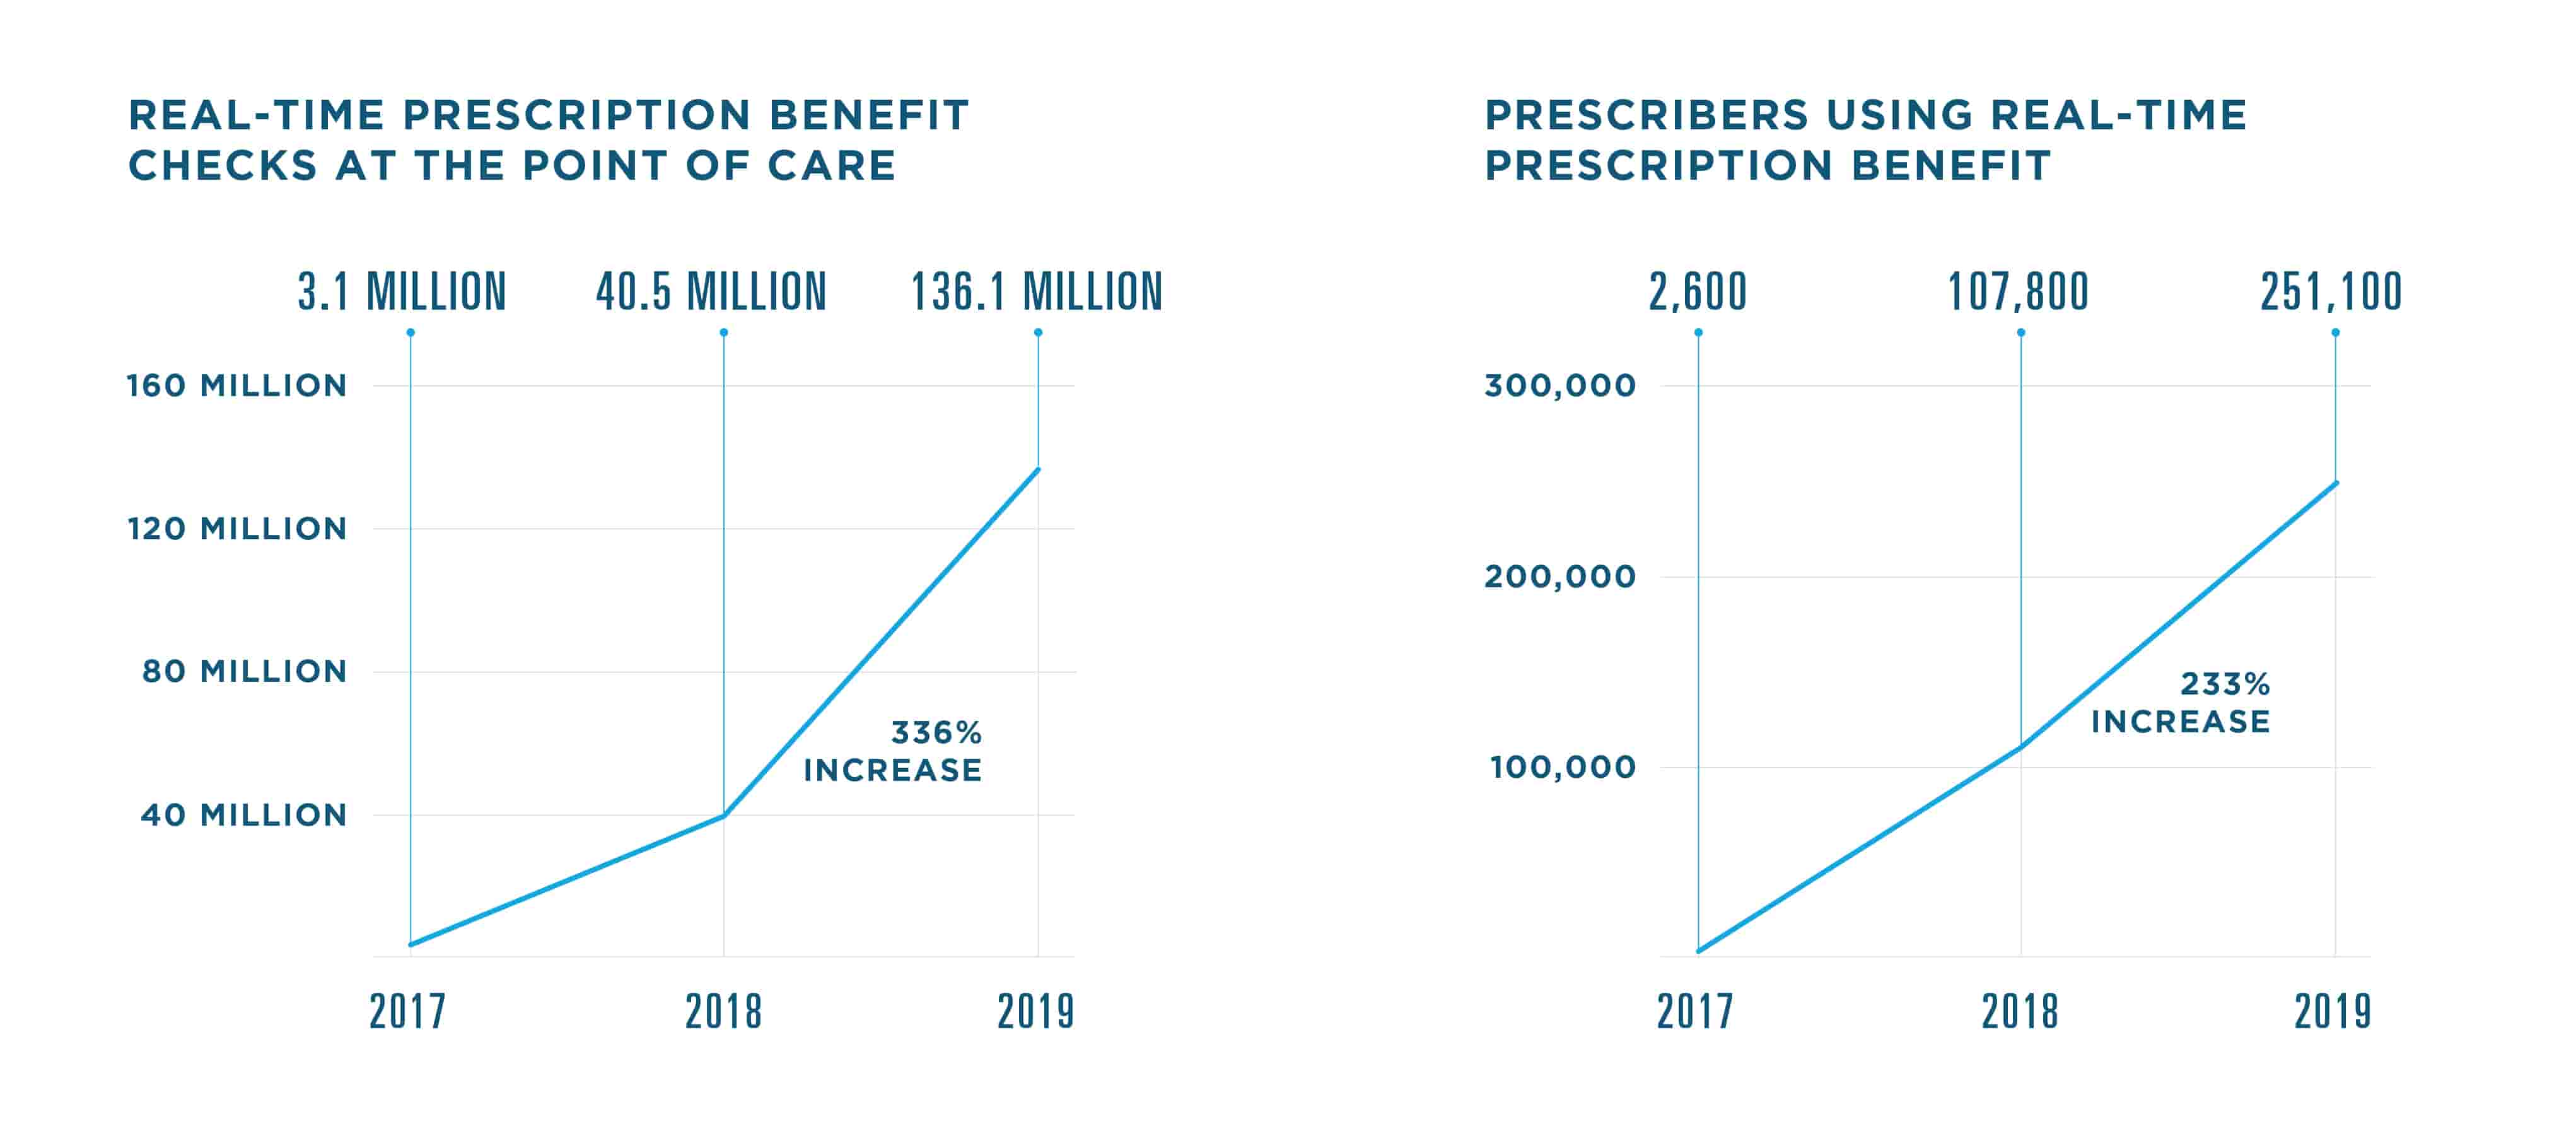 Real-Time Prescription Benefit checks increased 336% in 2019, reaching 136.1 million transactions. There were 40.5 million transactions in 2018 and 3.1 million in 2017. 251,000 prescribers used Real-Time Prescription Benefit in 2019, an increase of 233%. 107,800 prescribers used it in 2018 and 2,600 used it in 2017.